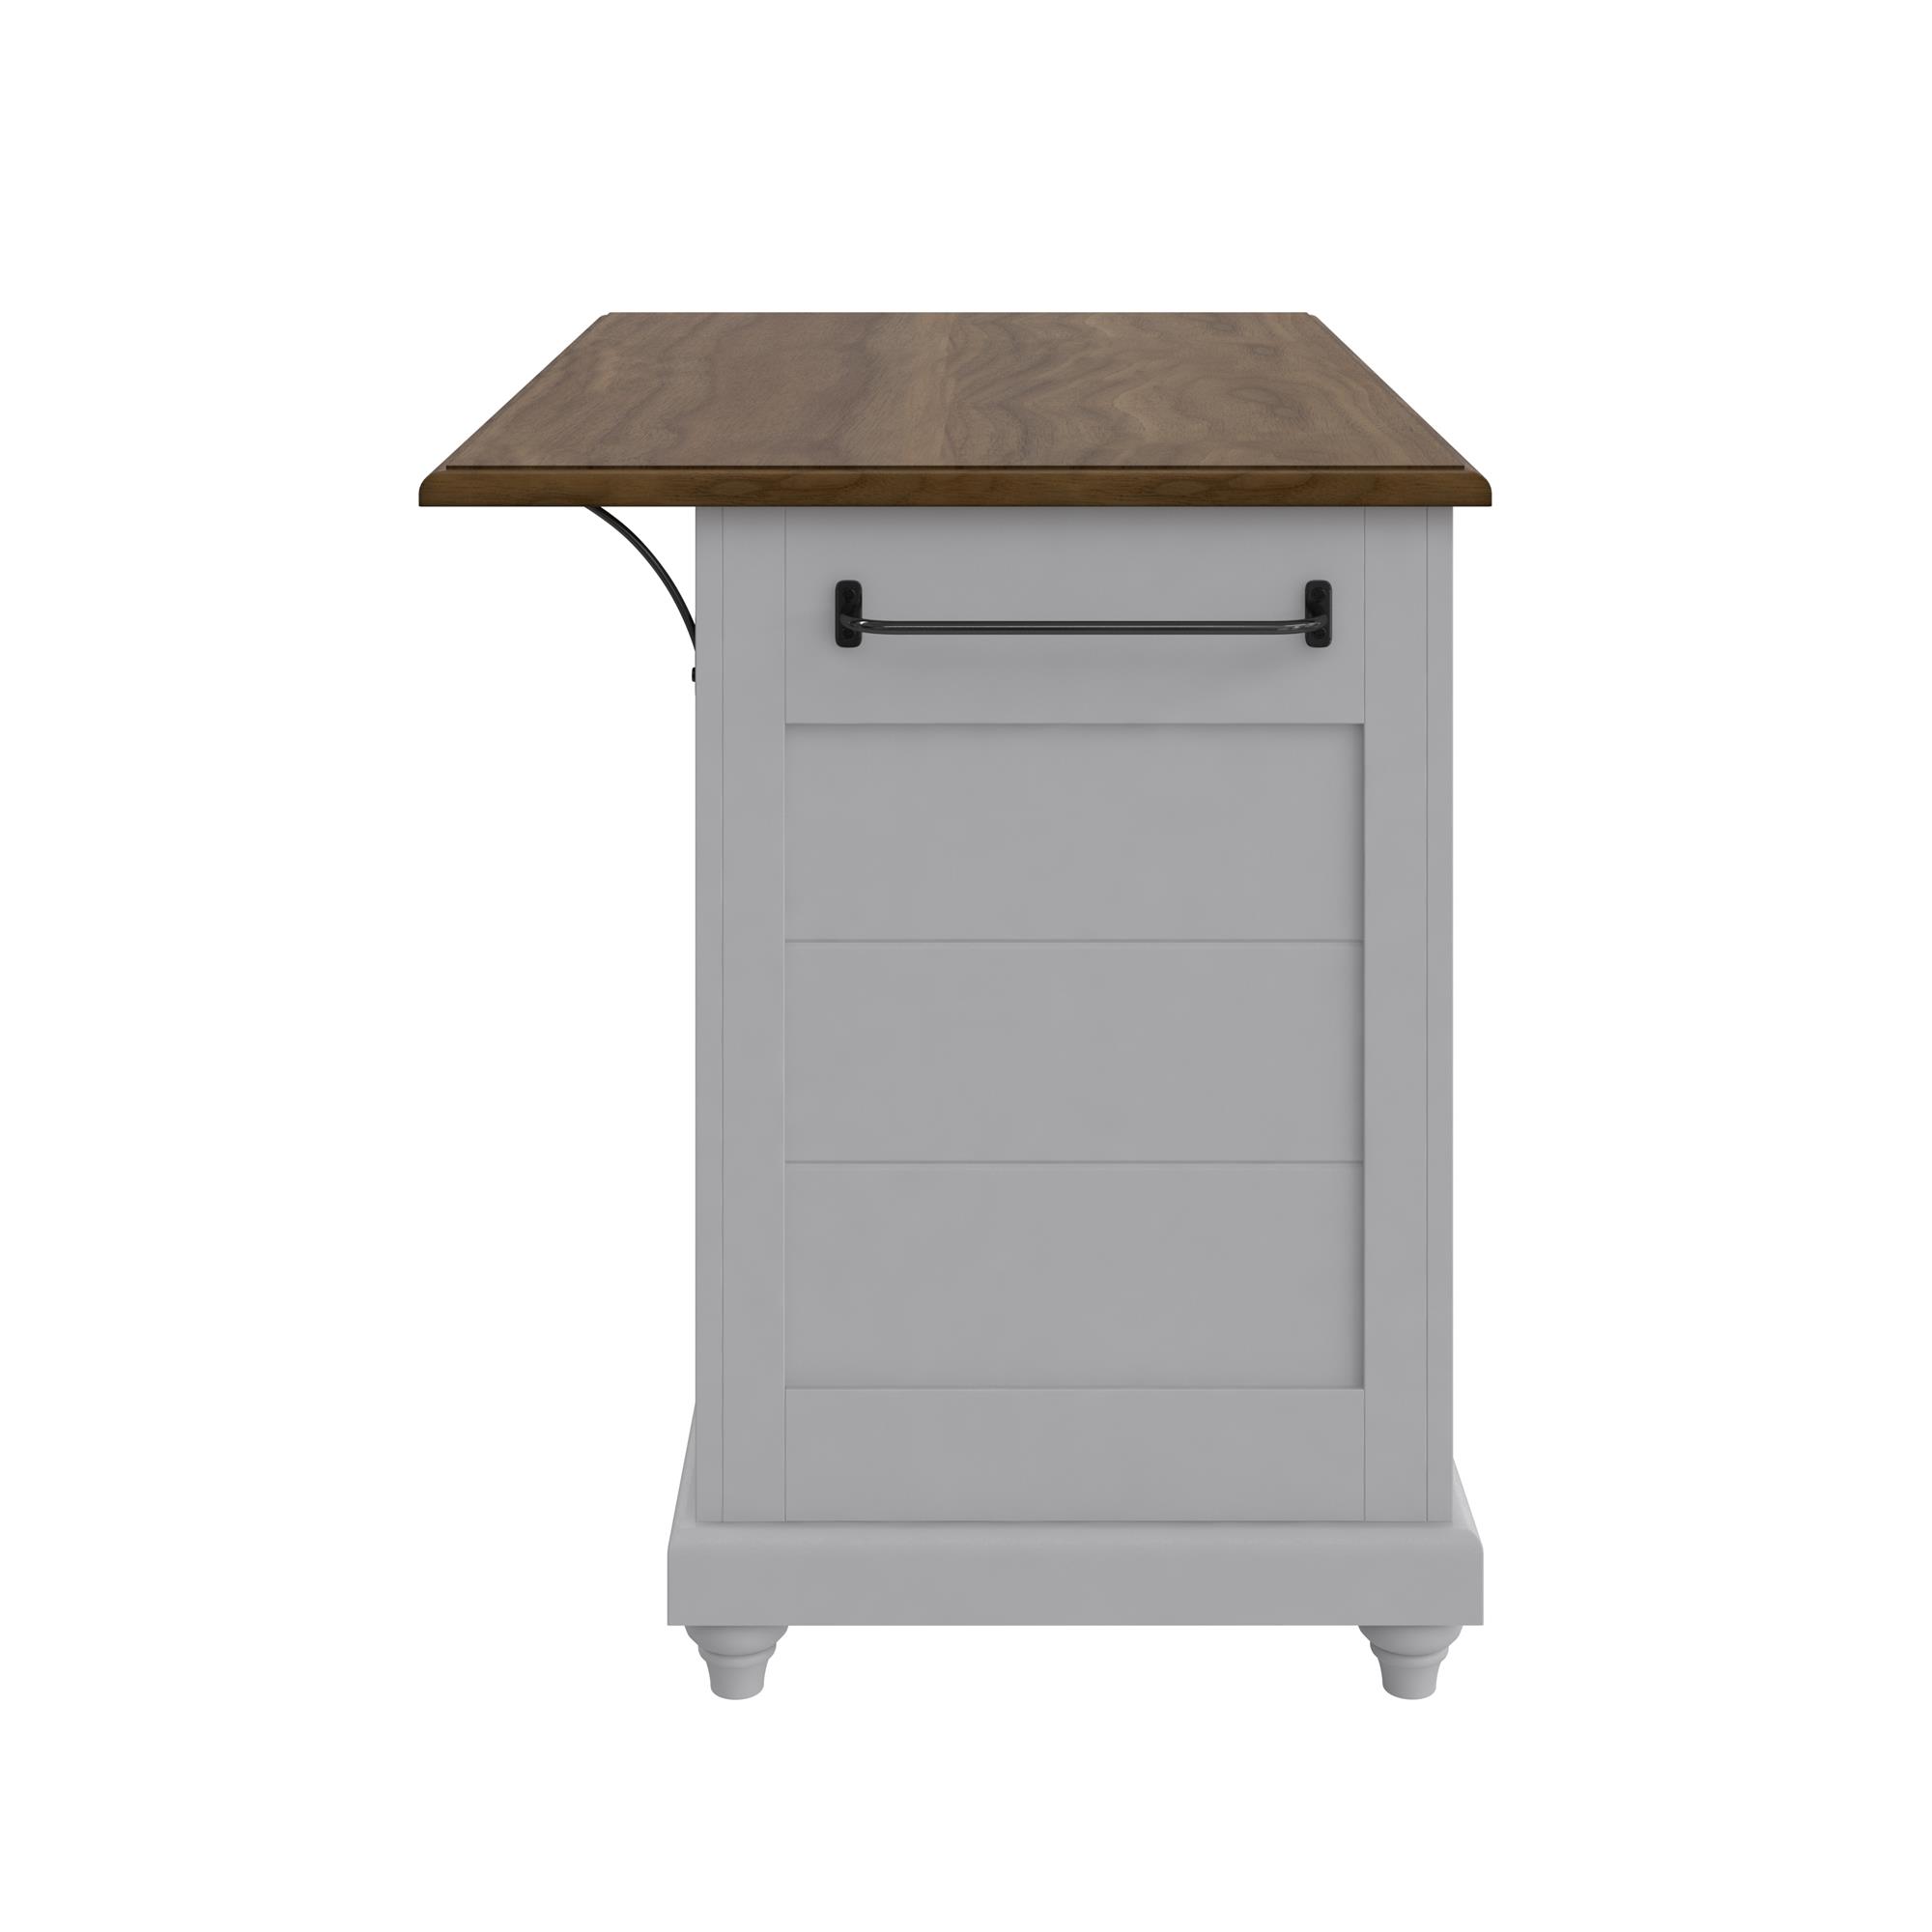 Kelsey Kitchen Island with 2 Stools and Drawers, Gray - image 2 of 28